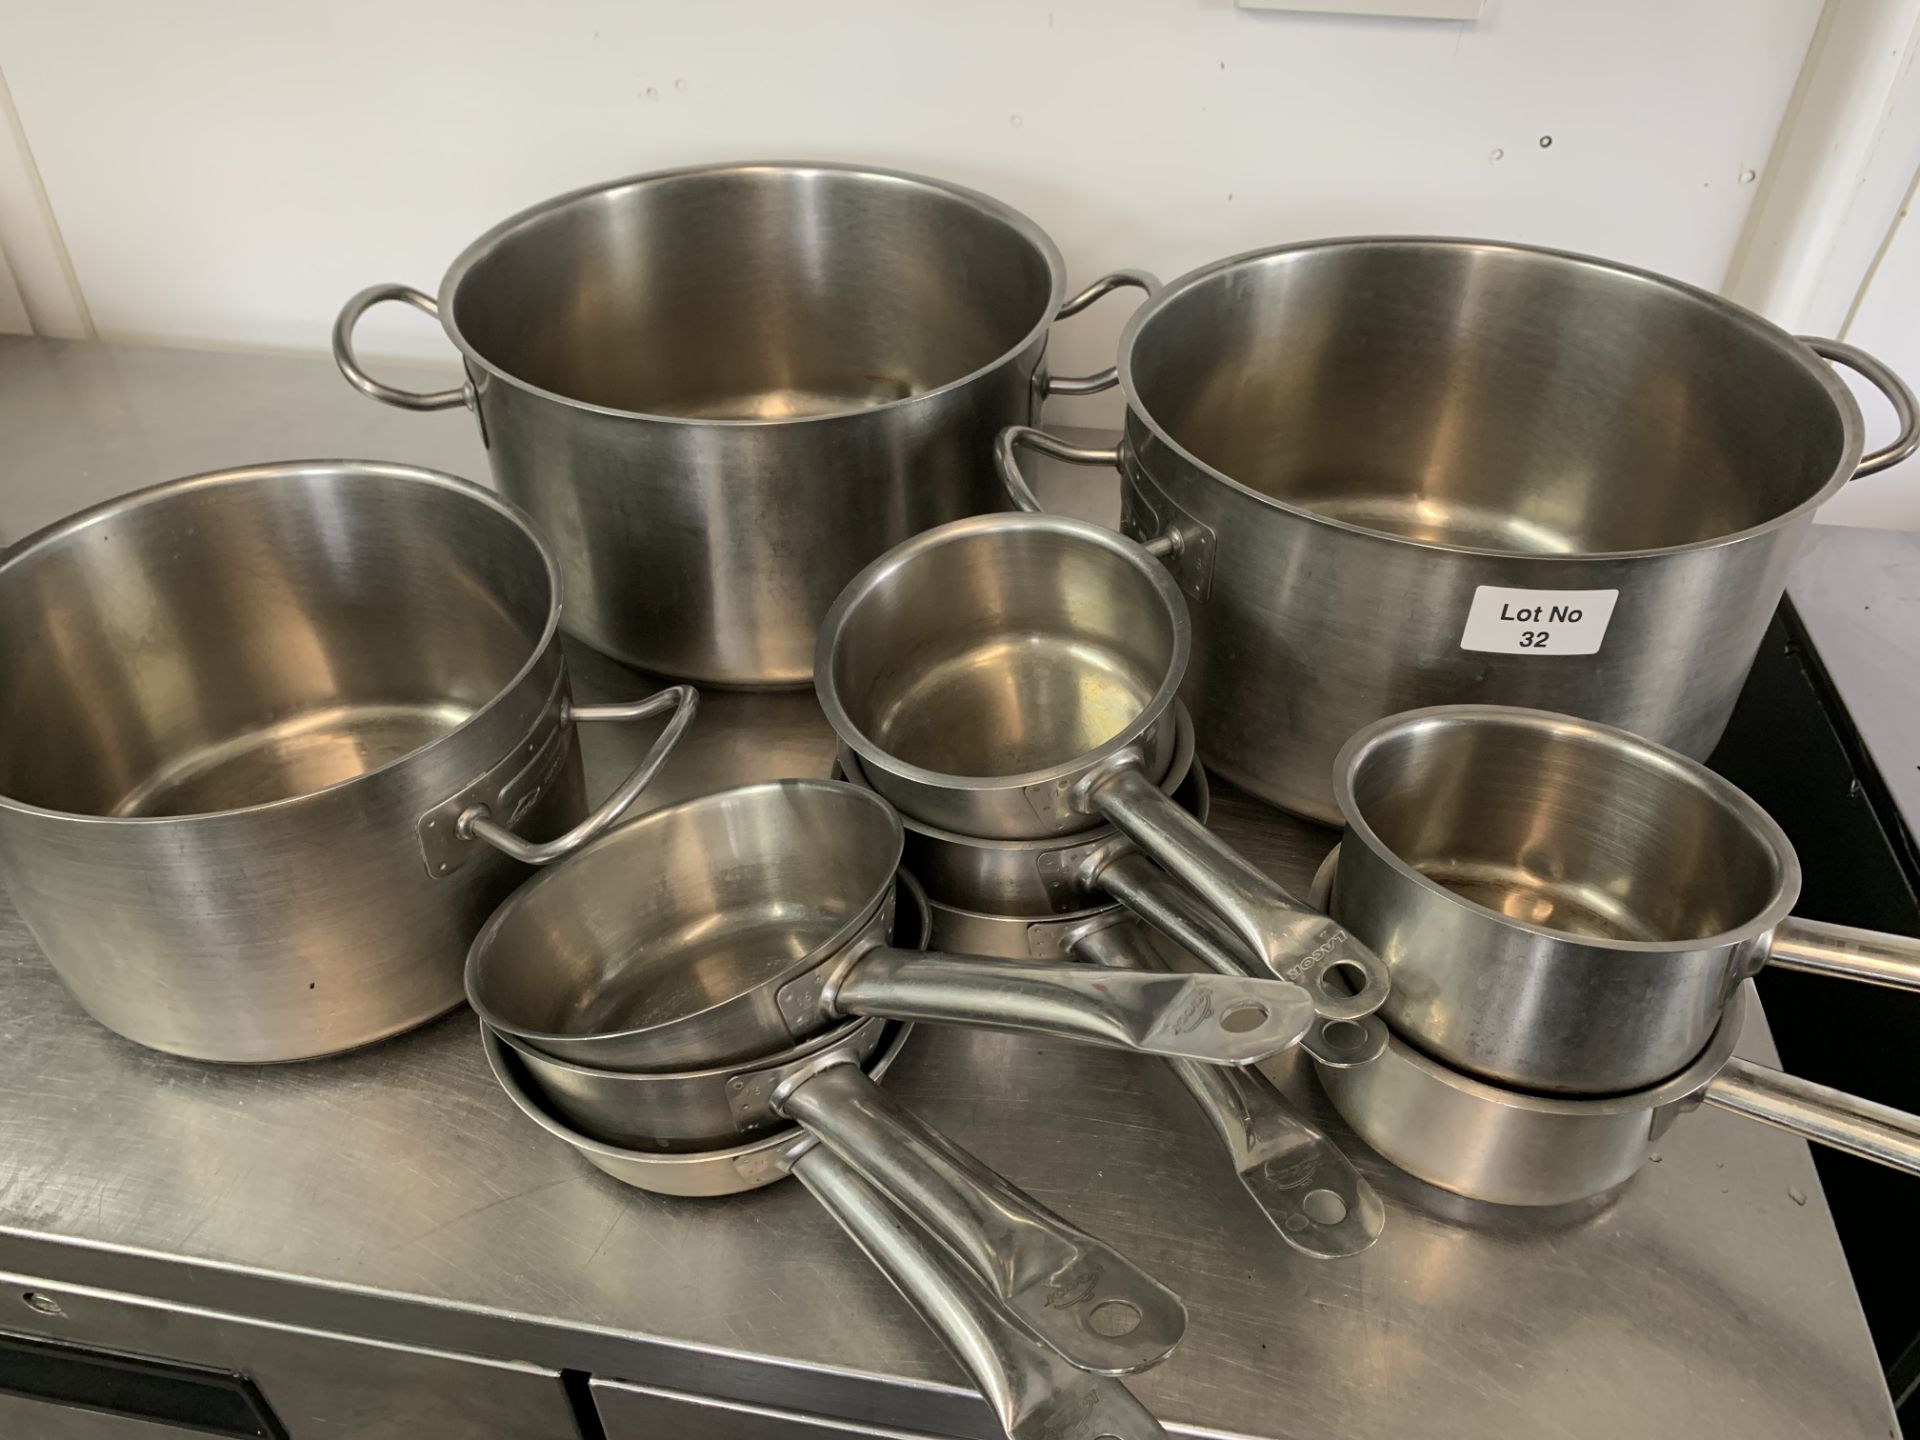 11 x Boiling pots and pans